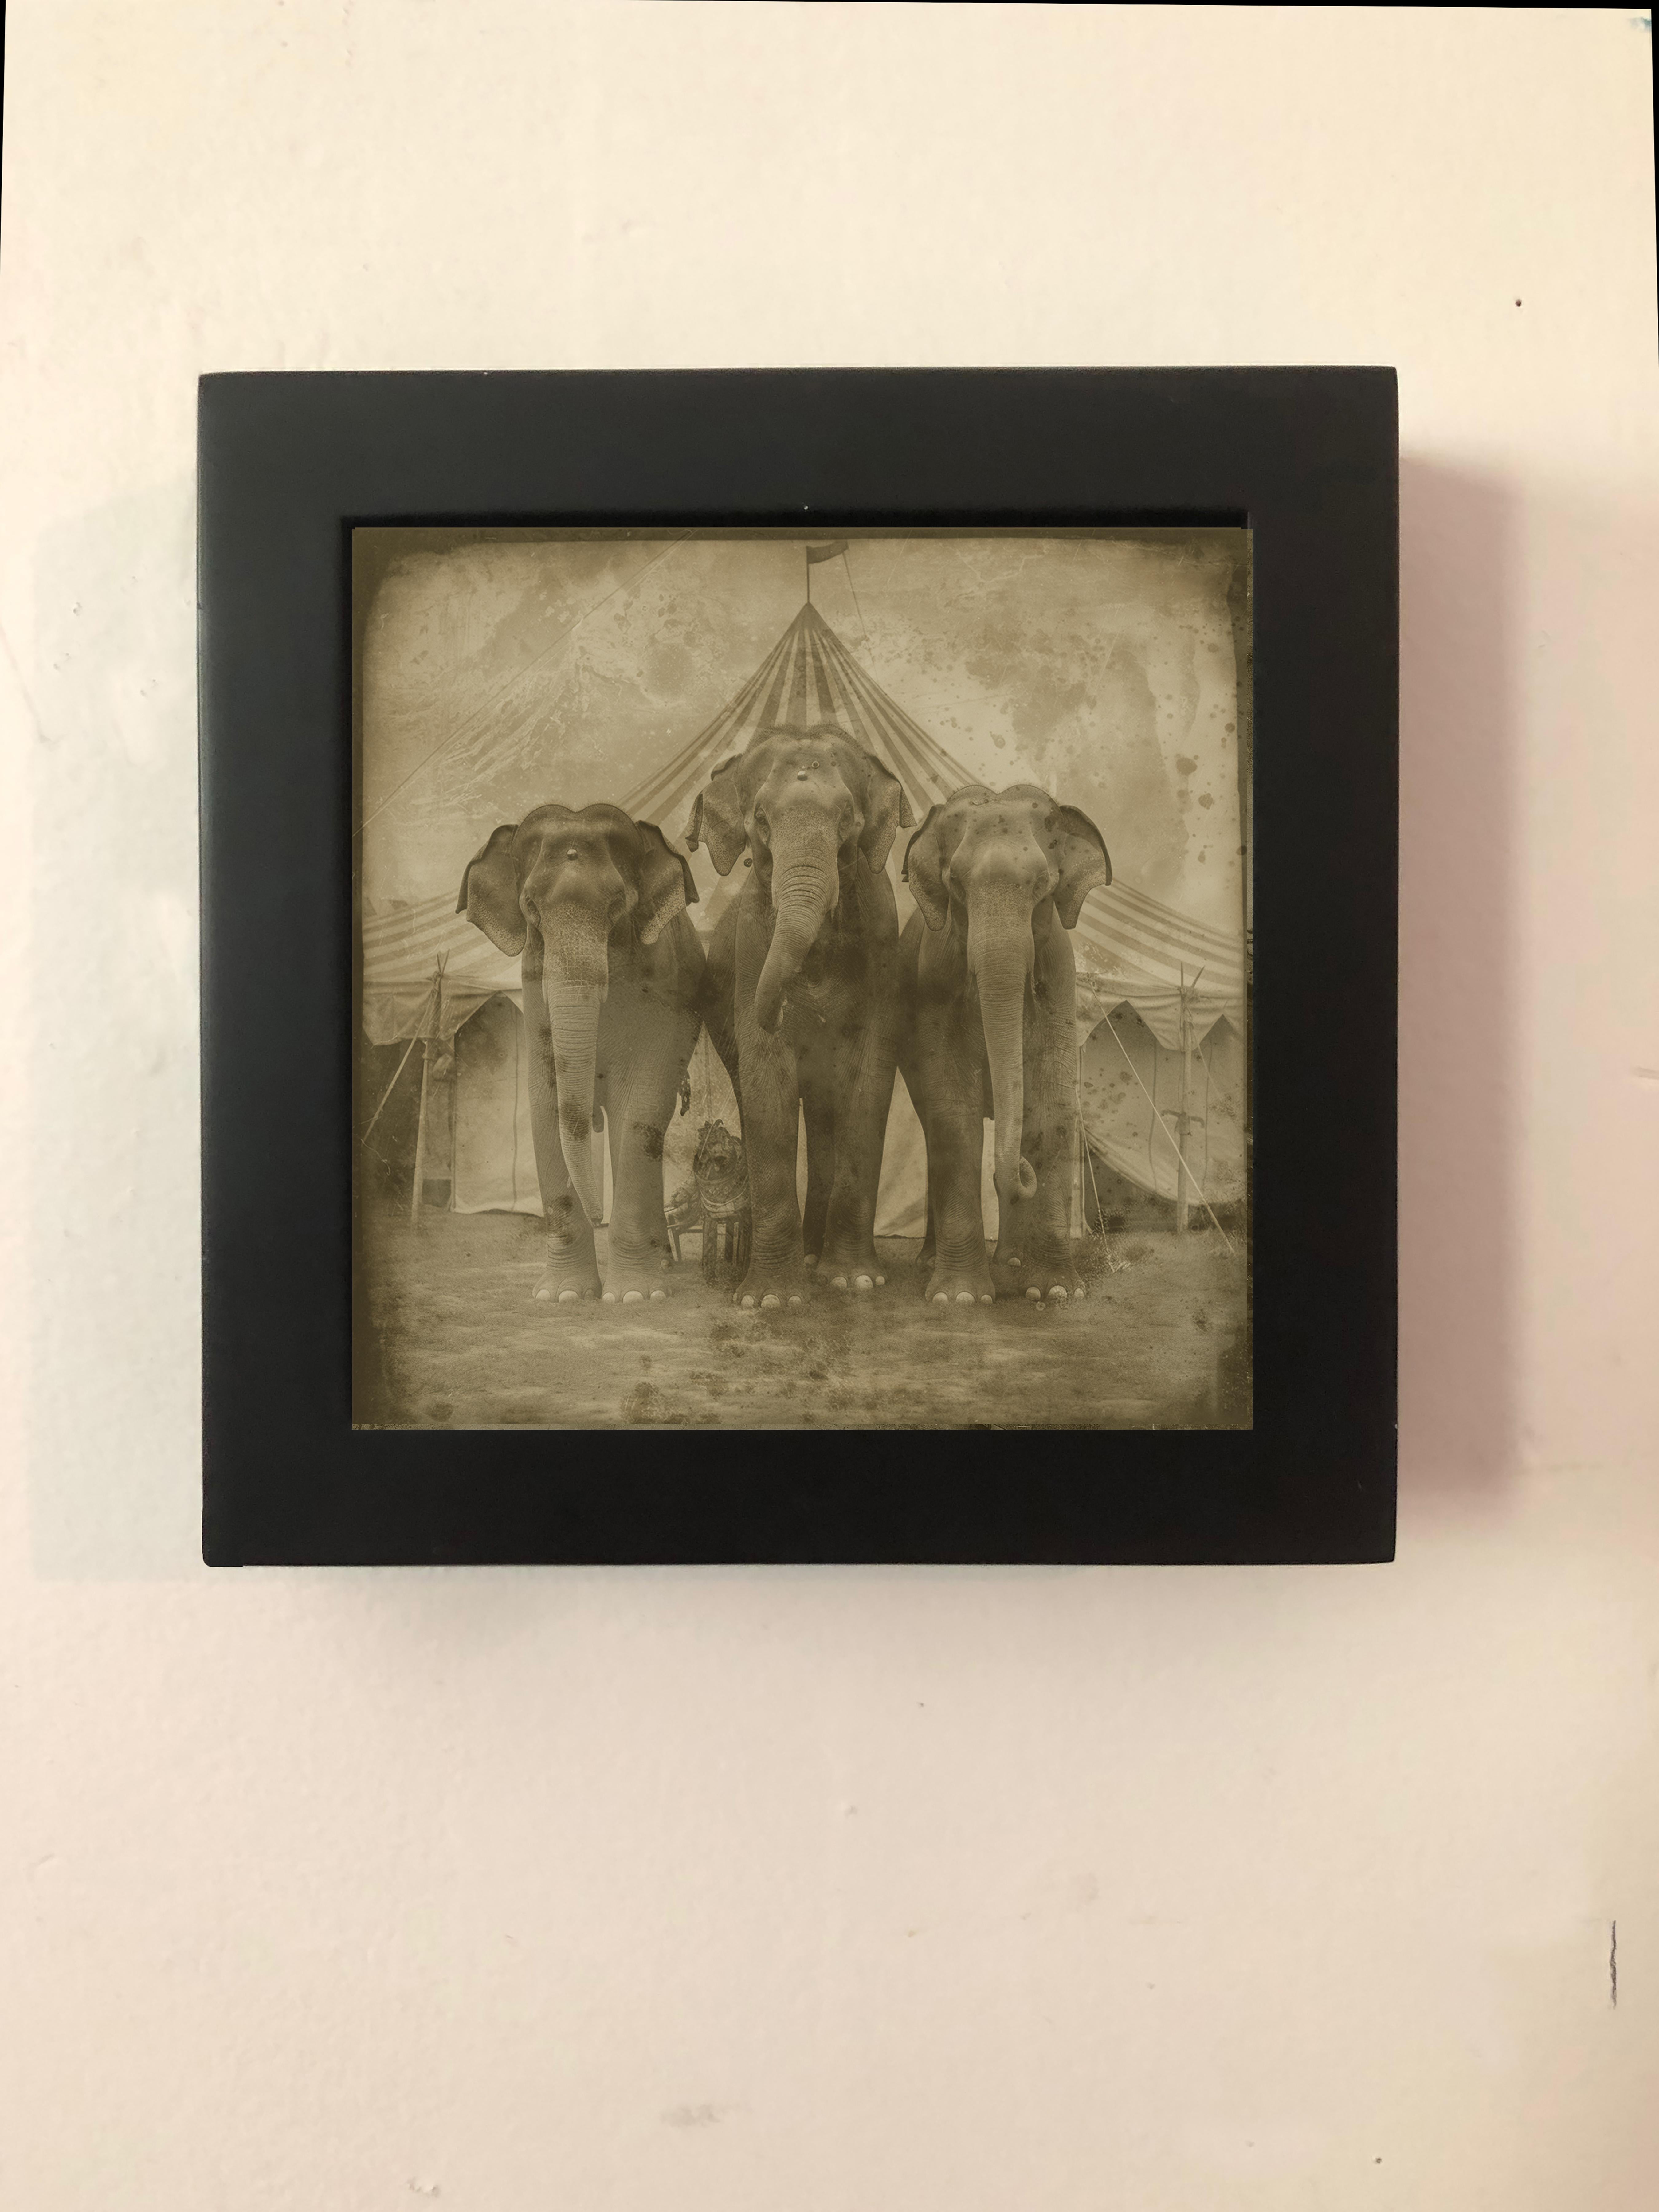 Three Circus Elephants - exotic daguerreotype reproduction Framed - Photograph by FPA Francis Pavy Artist